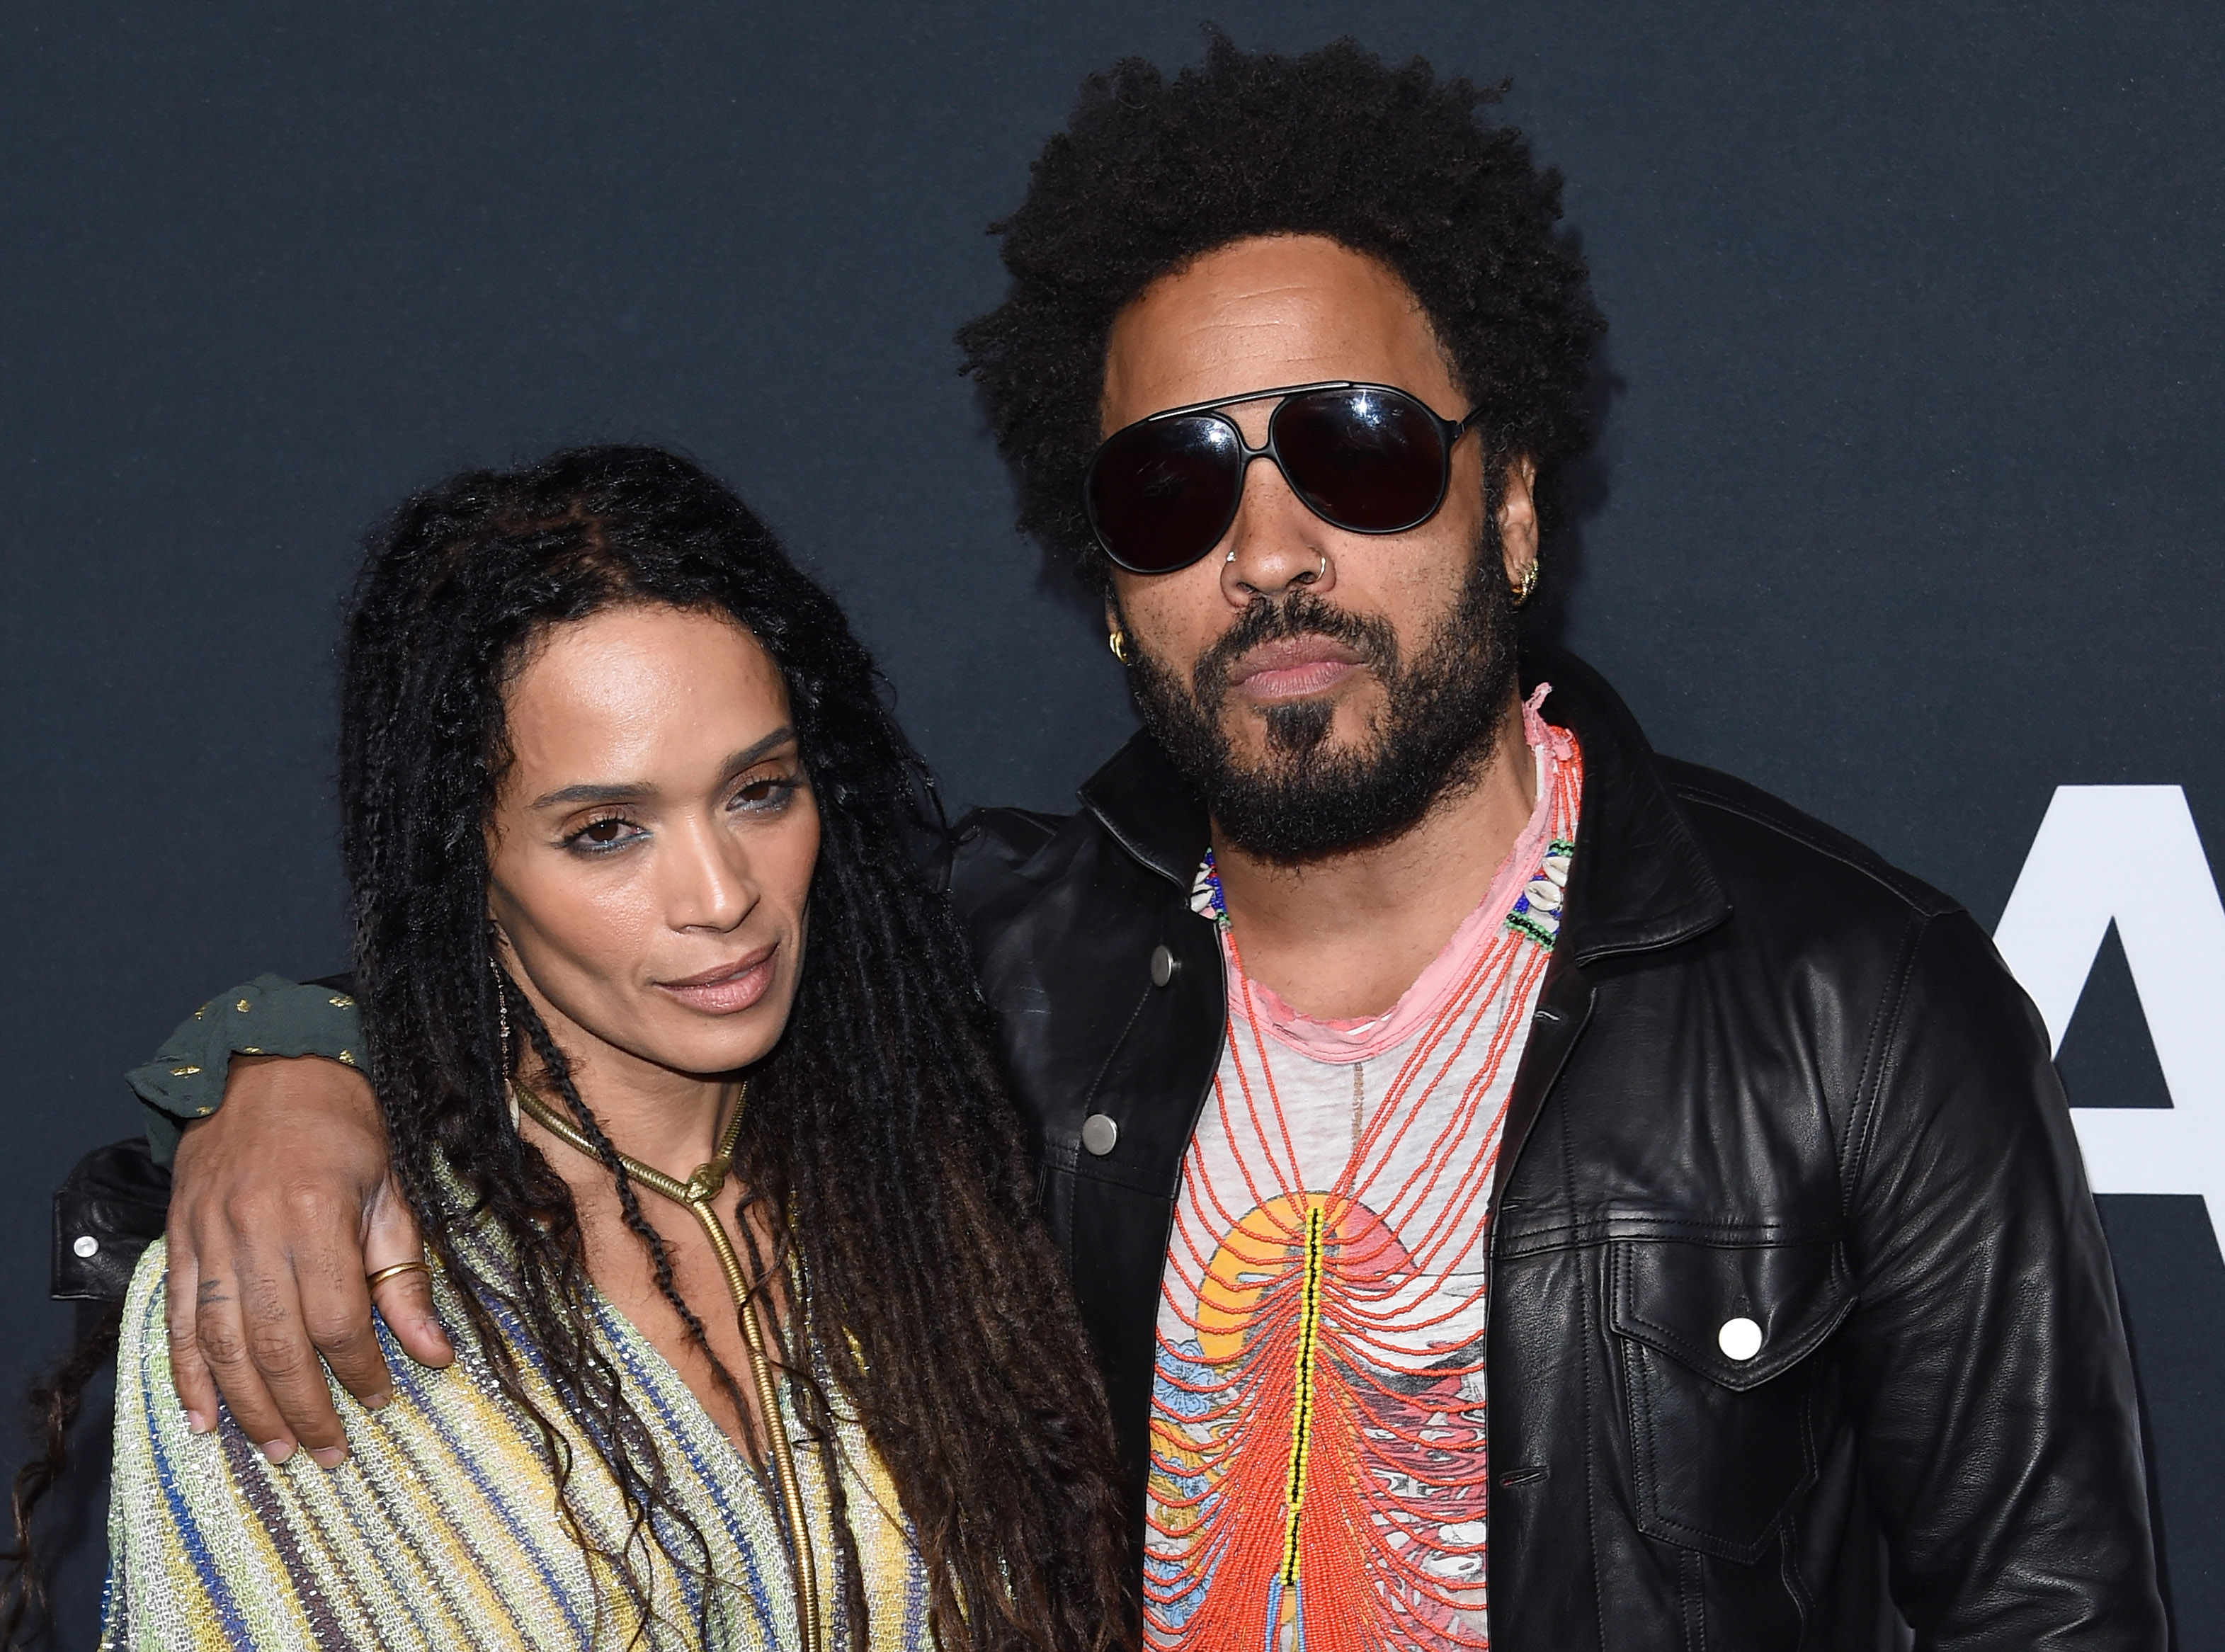 LOS ANGELES, CA - FEBRUARY 10:  Musician Lenny Kravitz (R) and actress Lisa Bonet arrive at SAINT LAURENT At The Palladium at Hollywood Palladium on February 10, 2016 in Los Angeles, California.  (Photo by Axelle/Bauer-Griffin/FilmMagic)